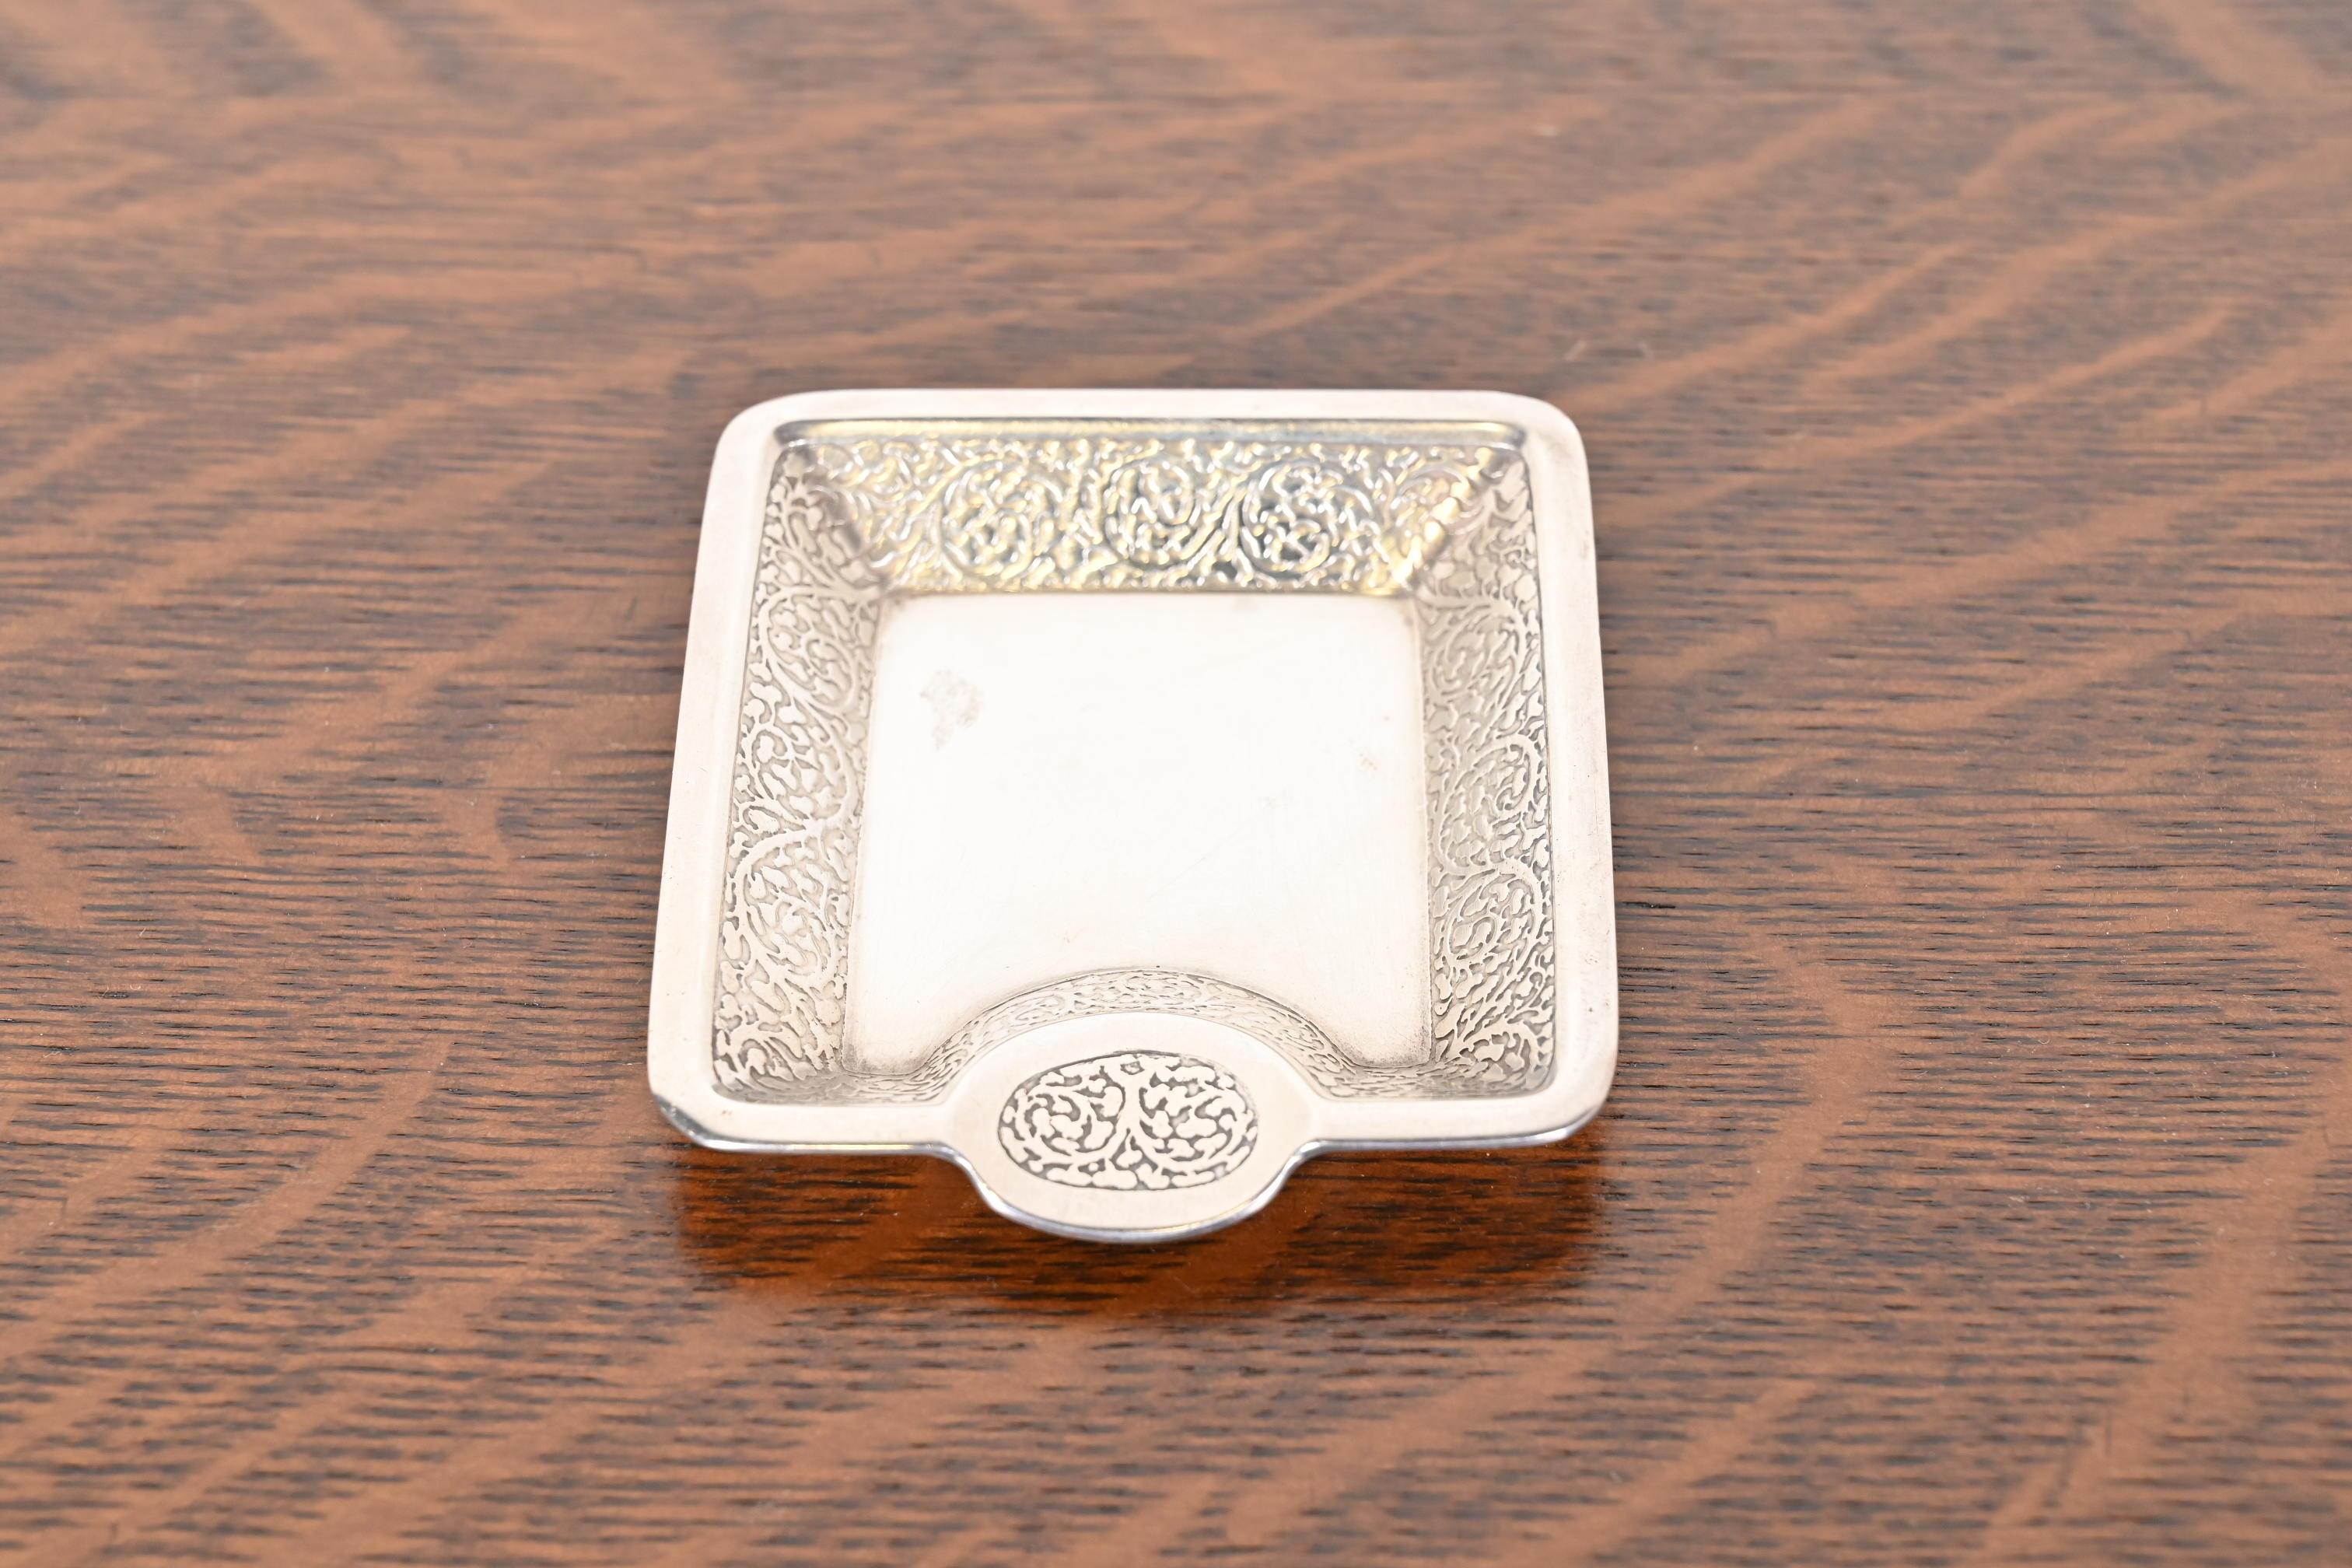 A gorgeous antique sterling silver ashtray or catchall tray

By Tiffany & Co. (signed to the underside)

USA, Circa Early 20th Century

Measures: 3.25